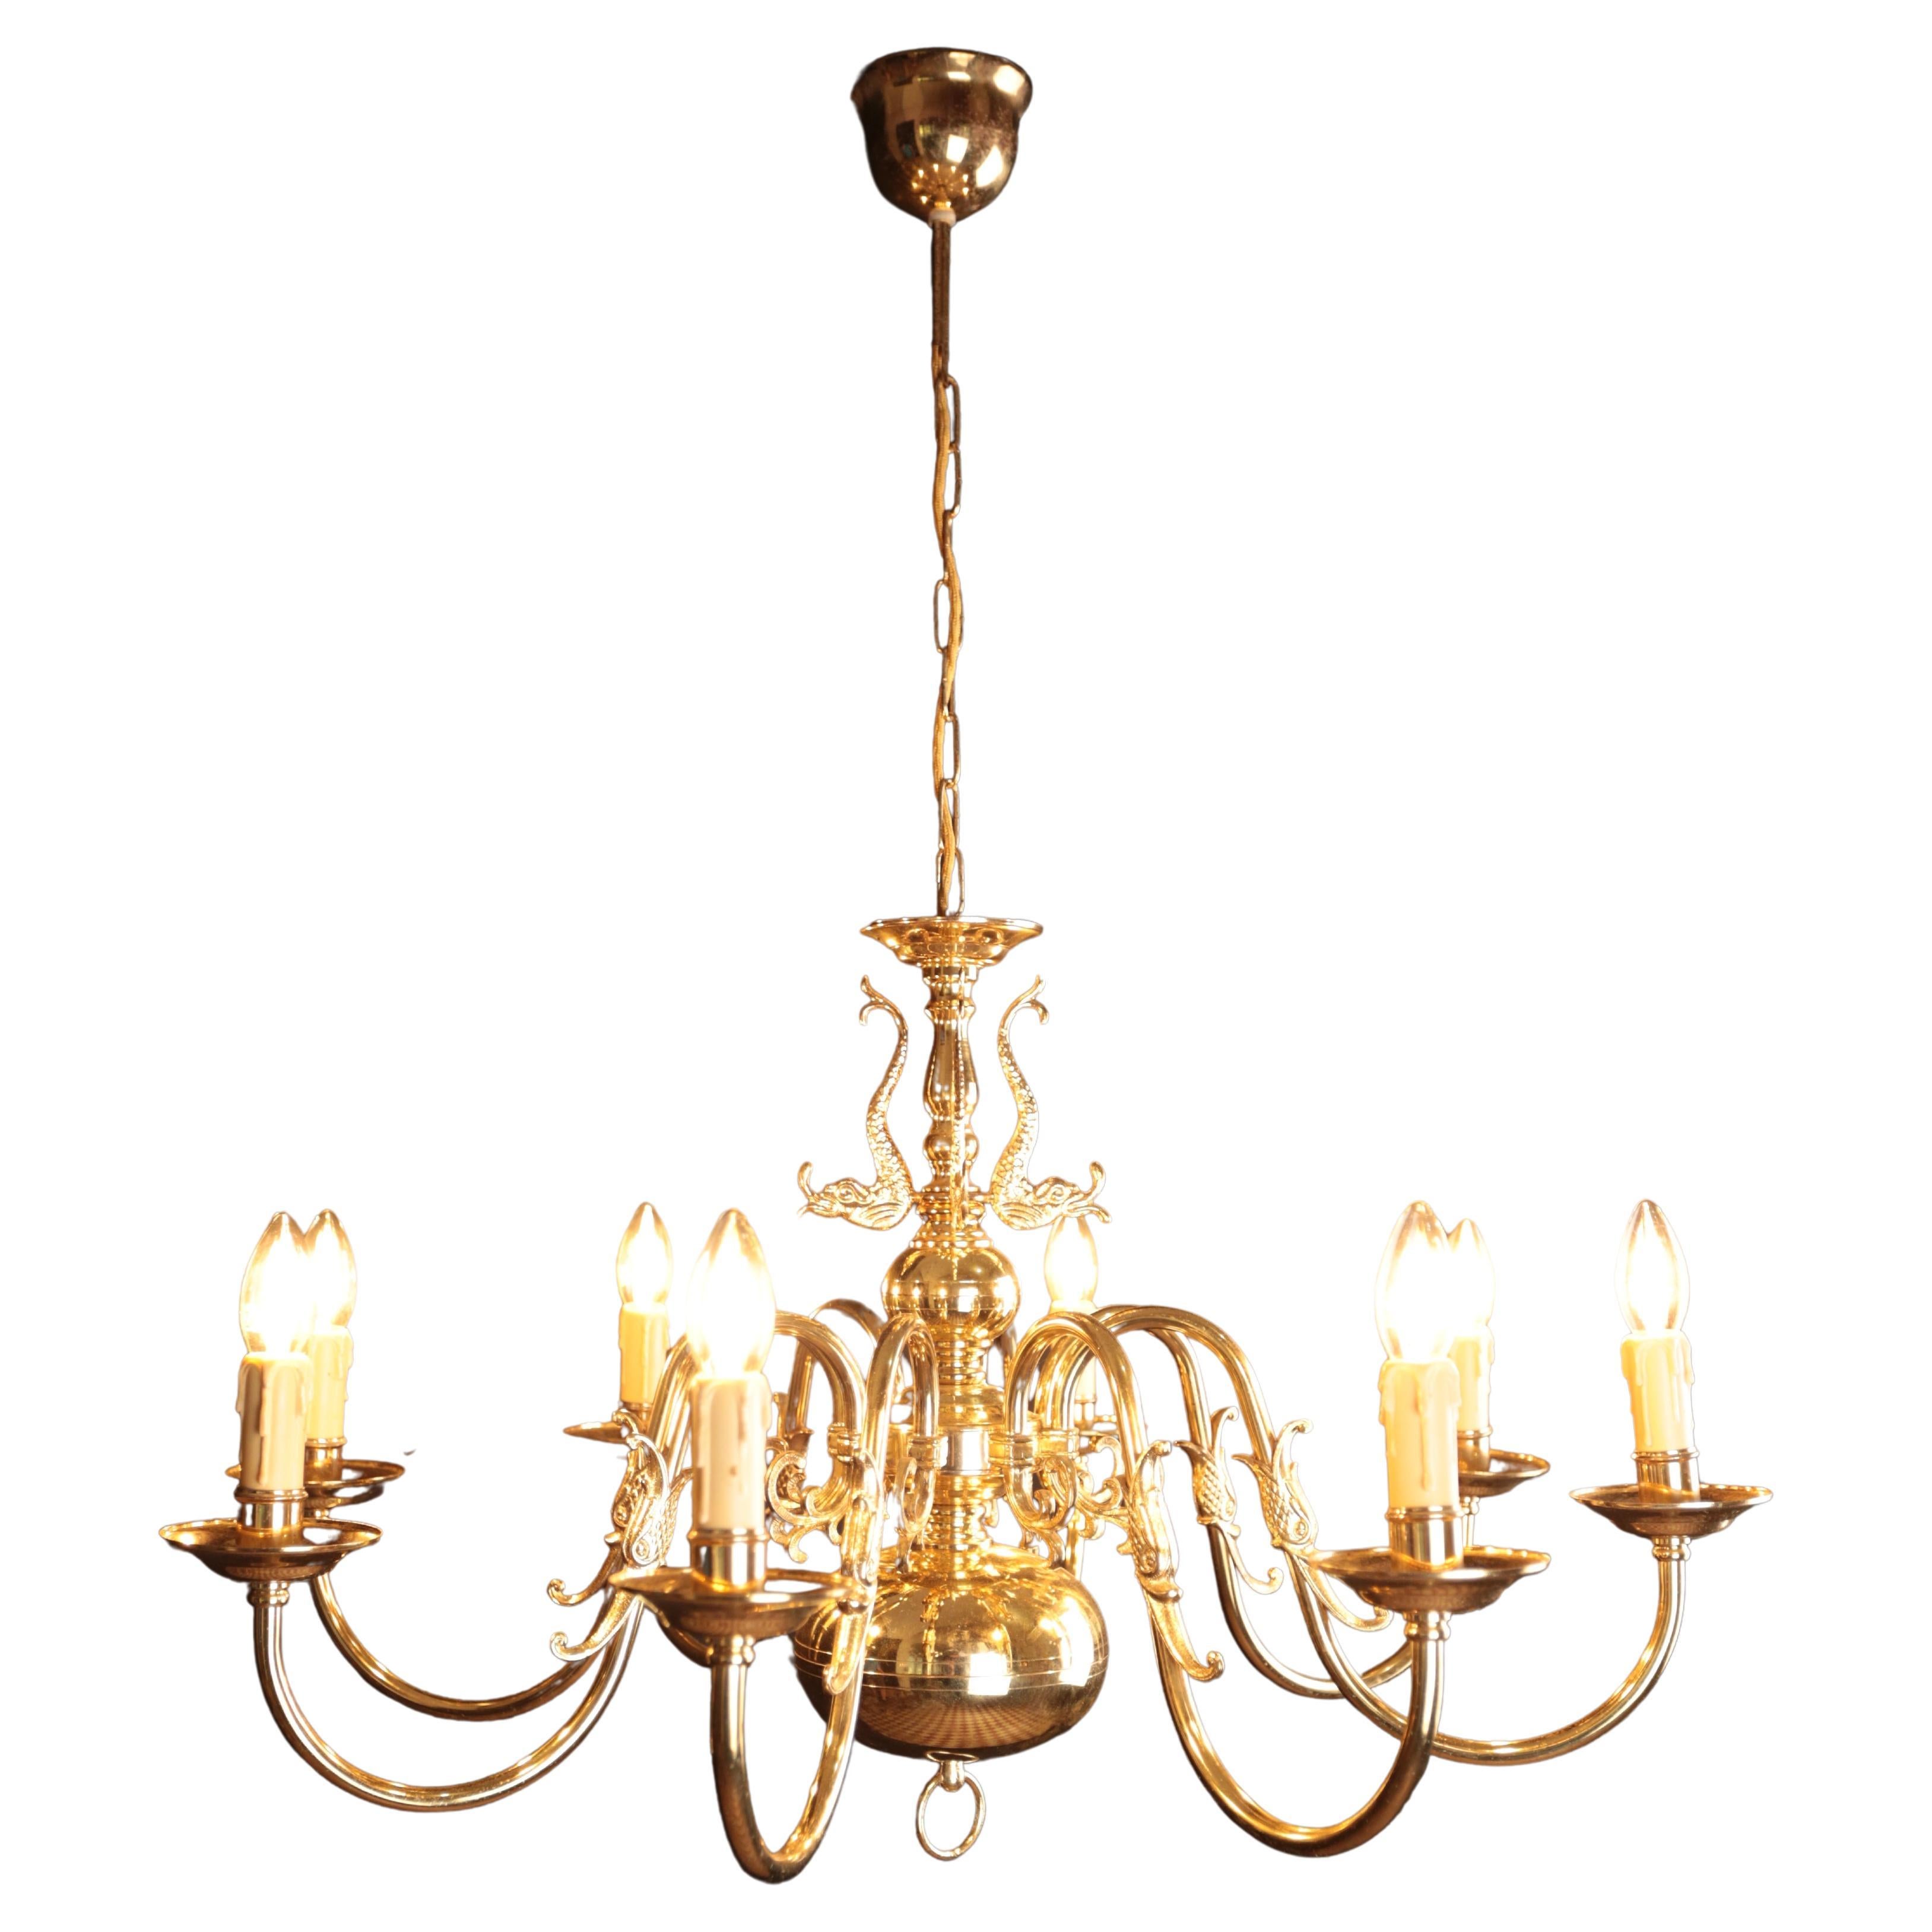 Eight-armed Flemish chandelier. Functional